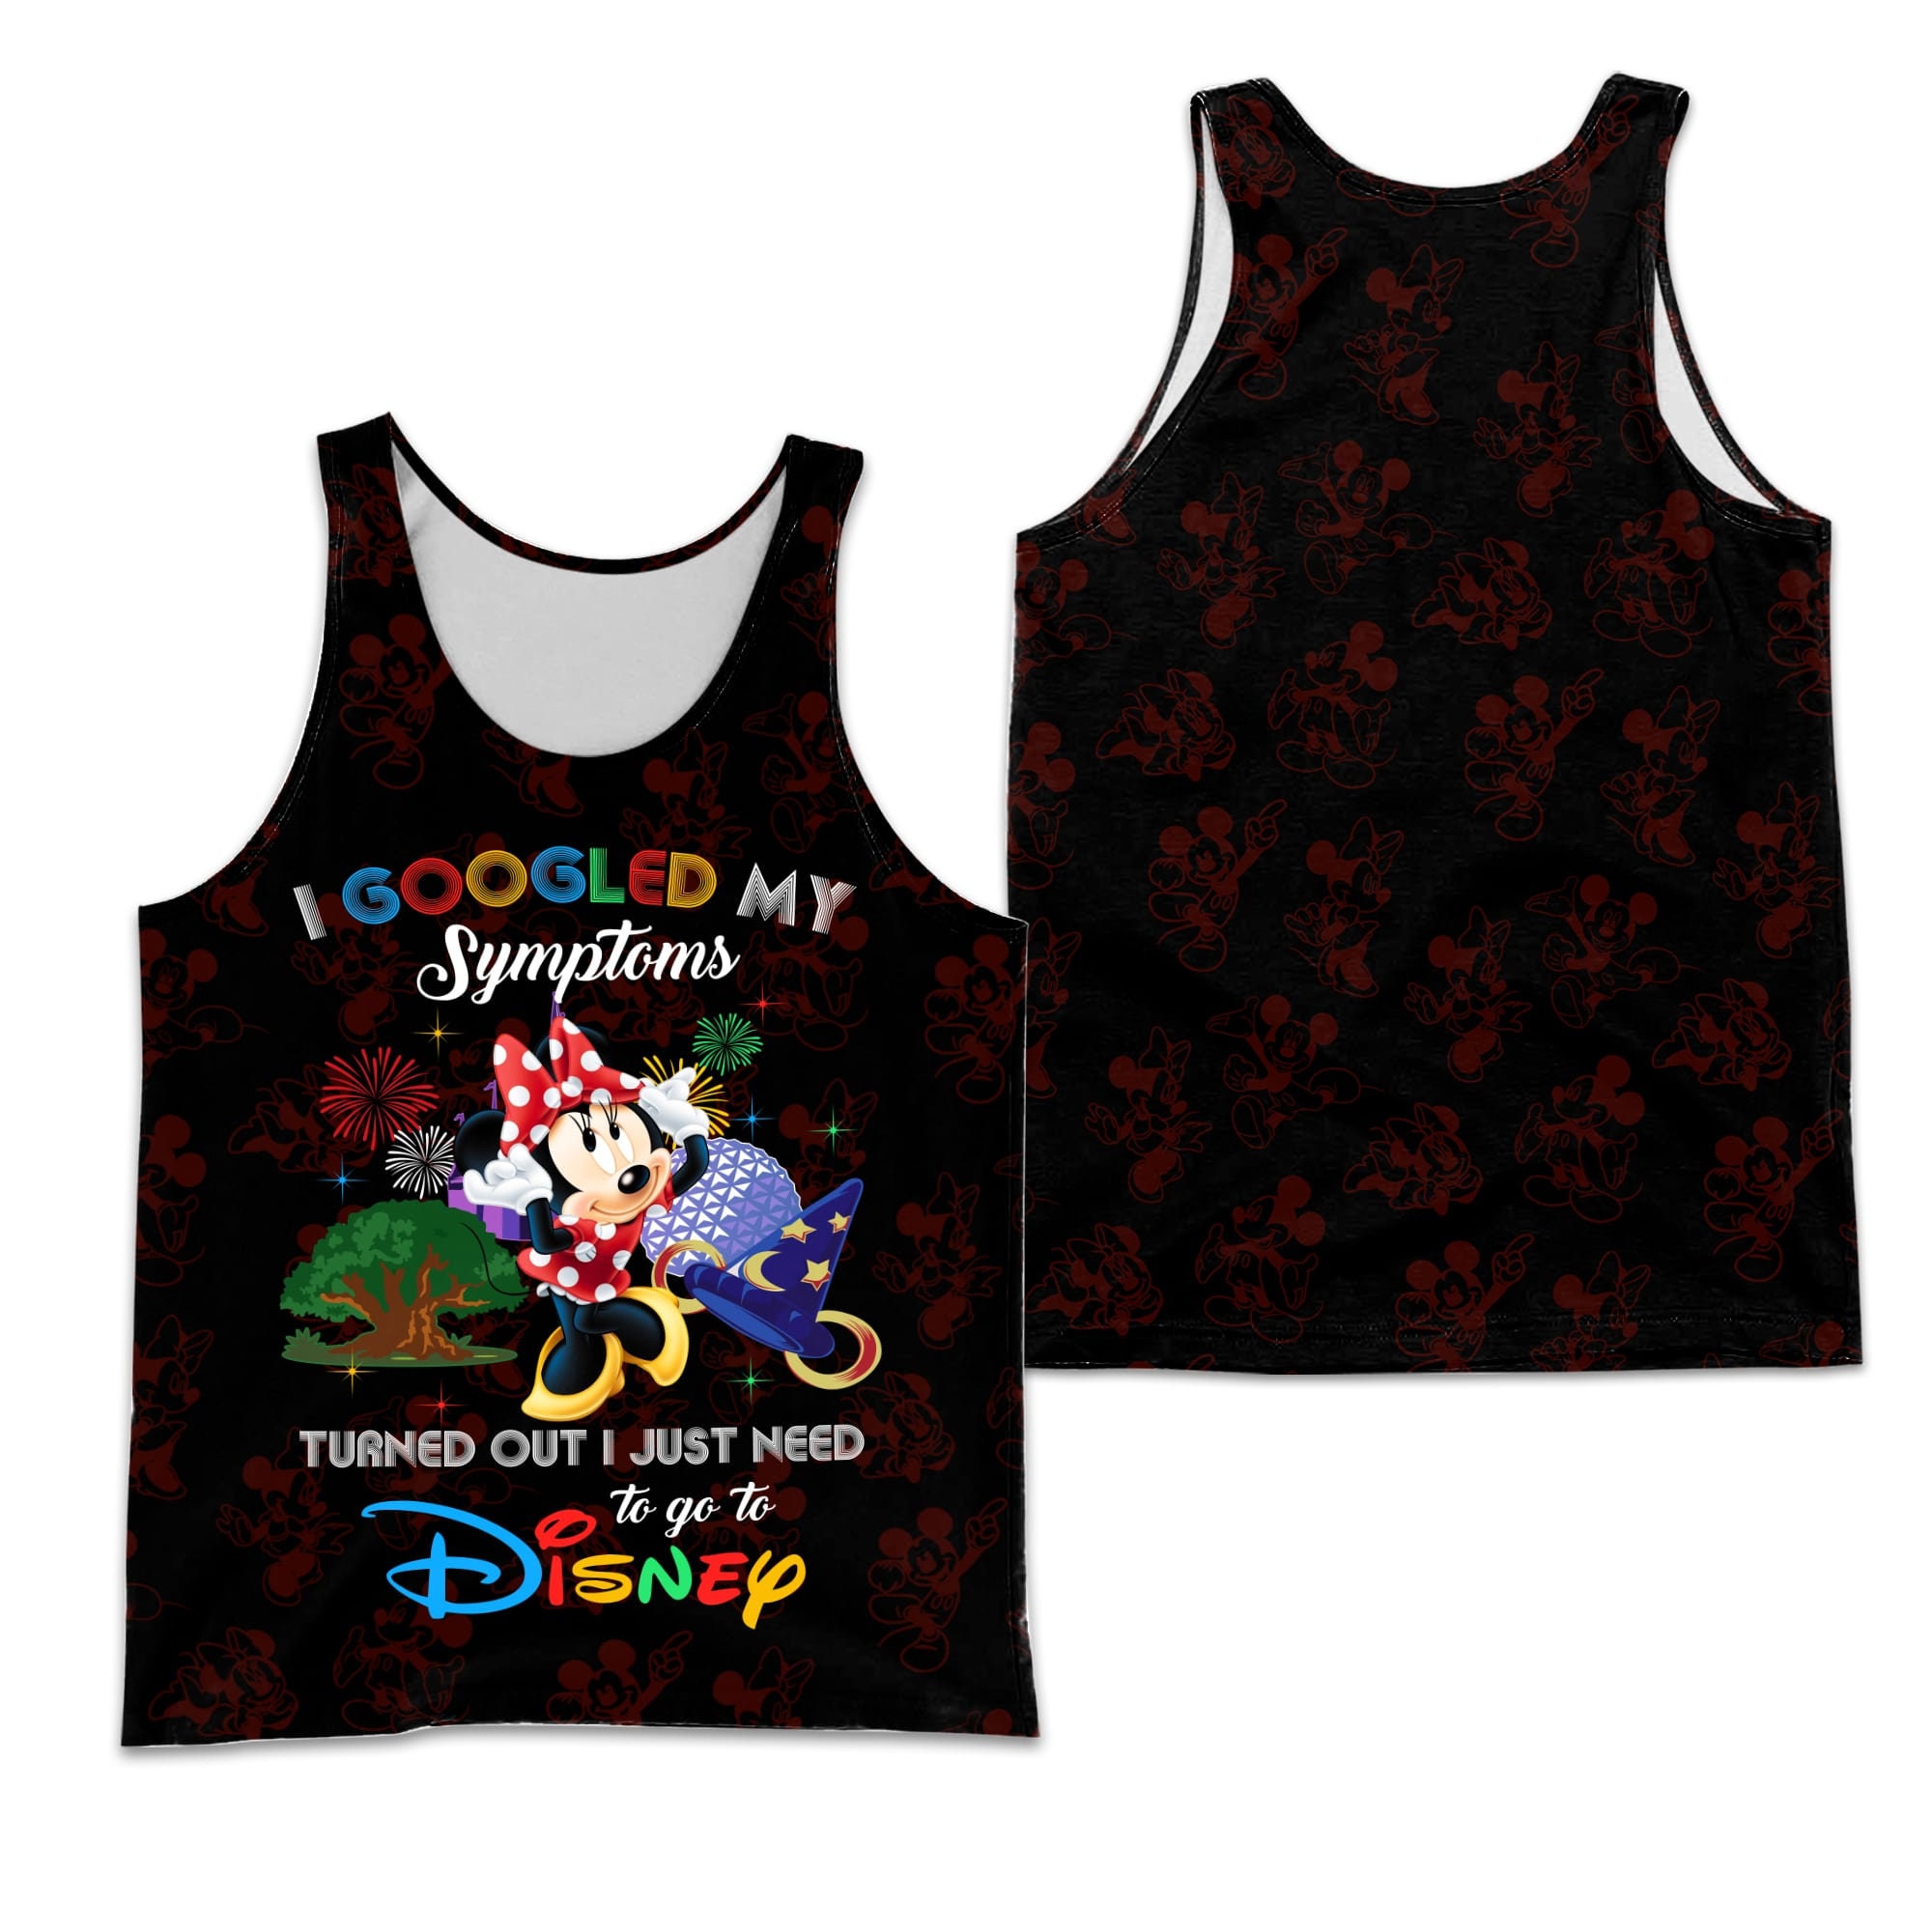 Minnie Mouse Google Funny Quote Black Disney Cartoon Graphic Summer Vacation Tanktop